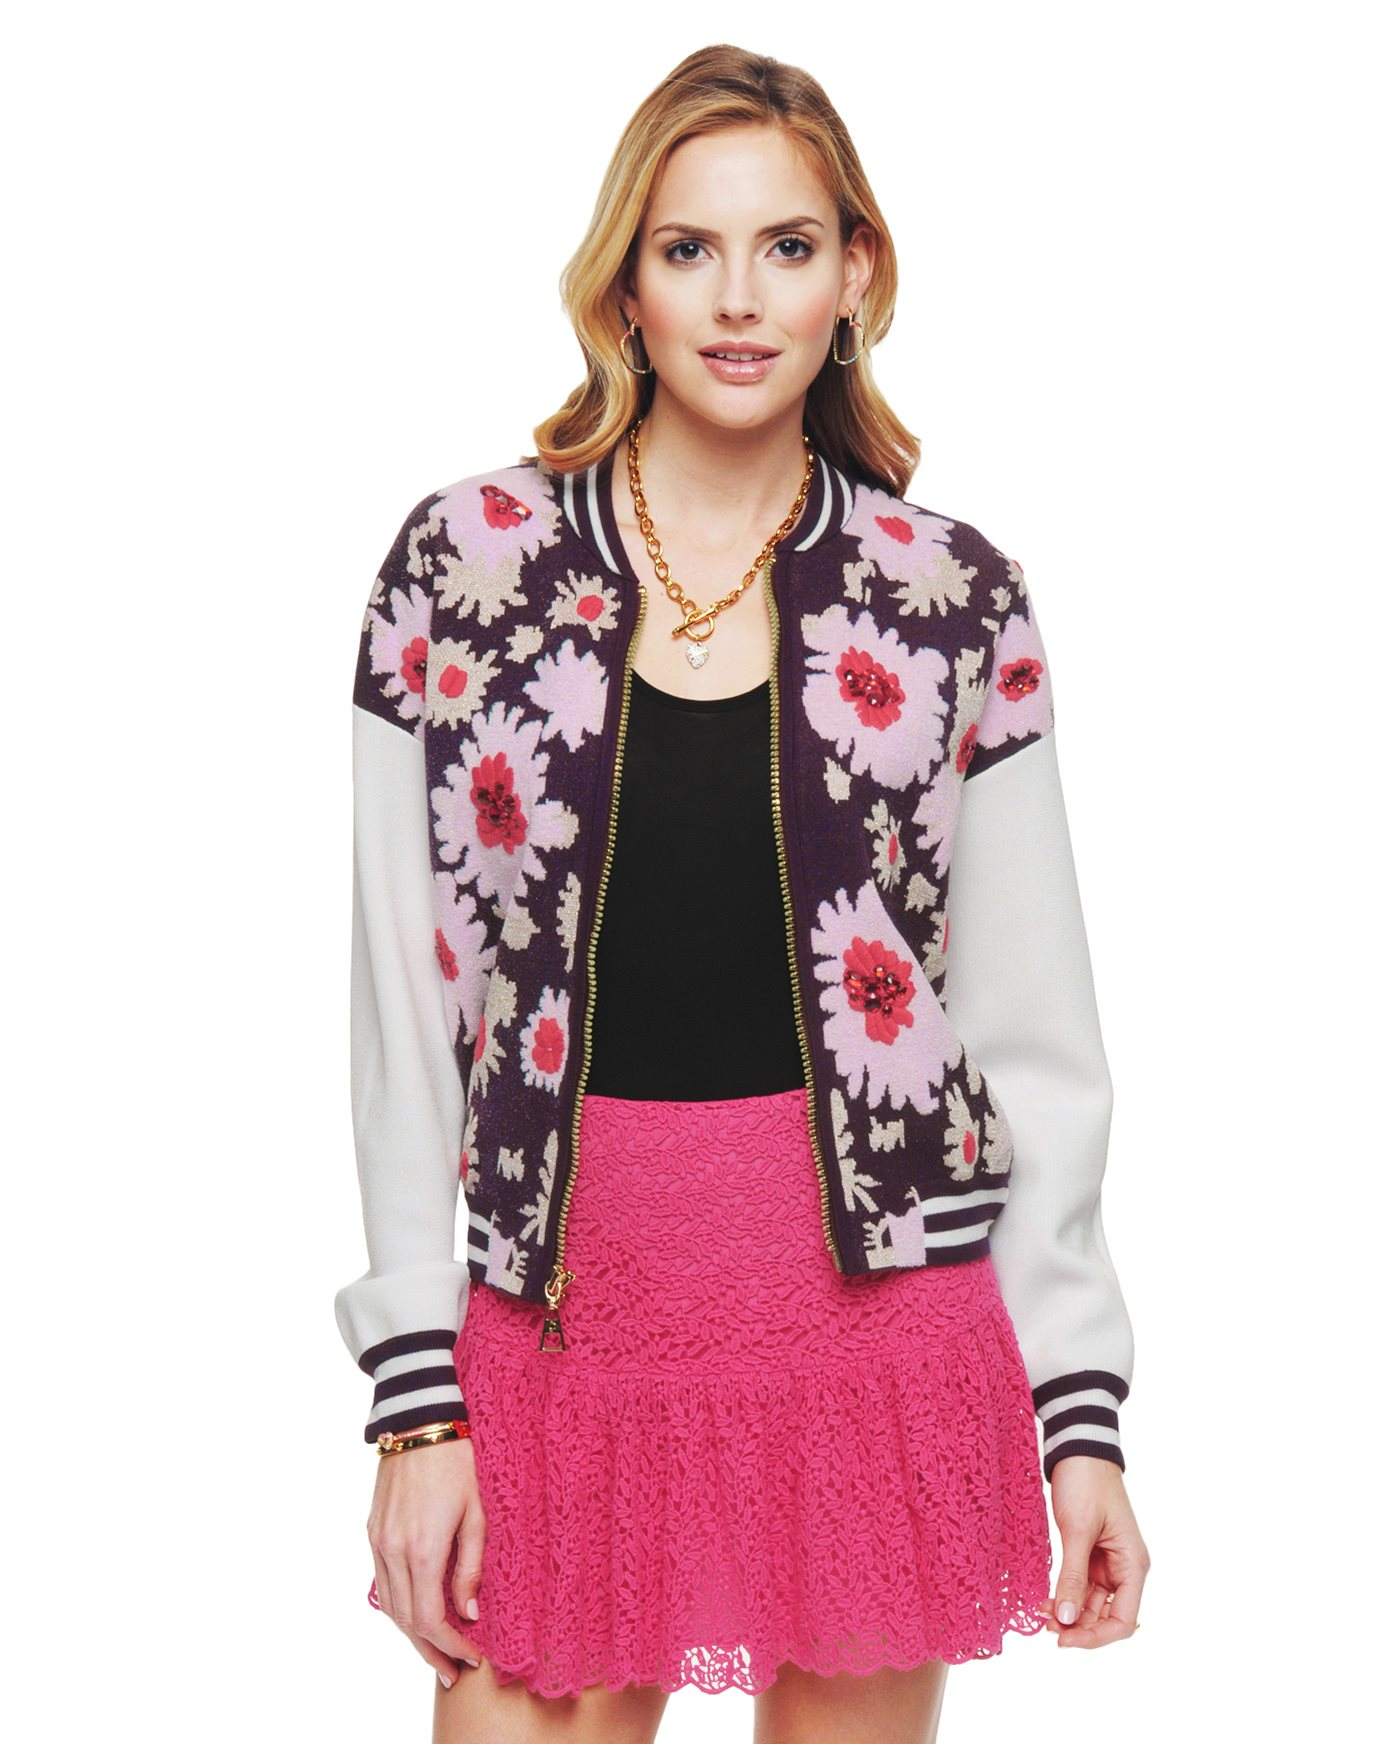 juicy-couture-dark-plum-combo-exploded-floral-jacquard-jacket-purple-product-3-810098315-normal.jpeg